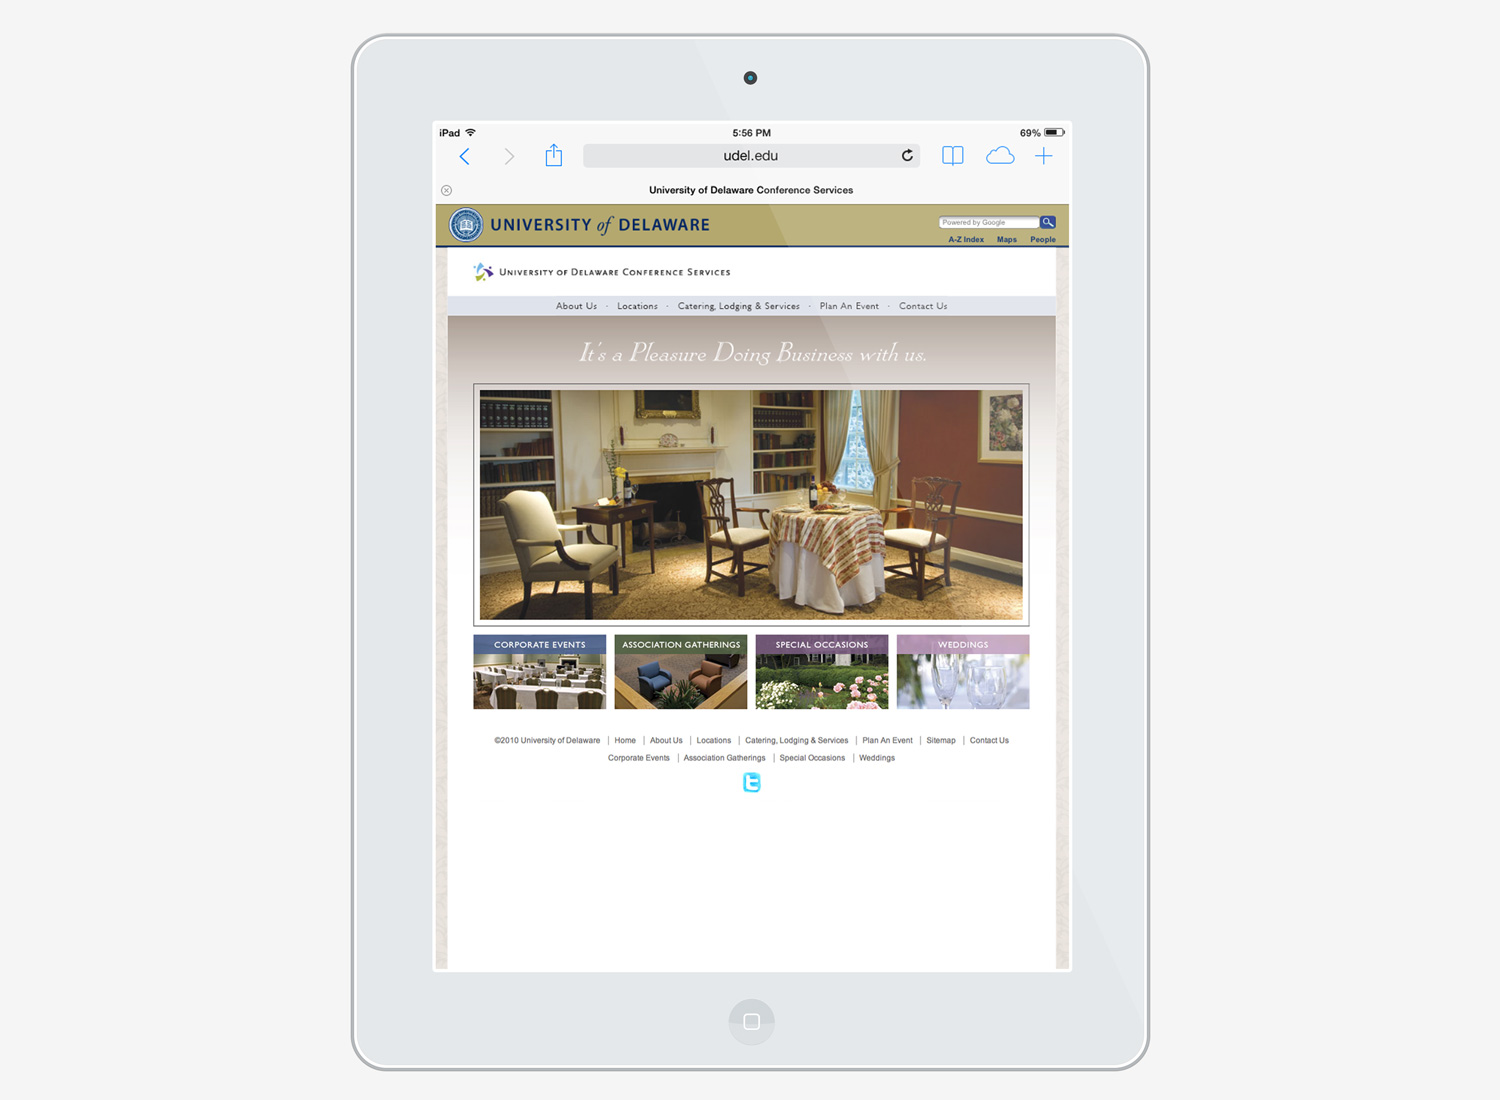 University of Delaware conference services website